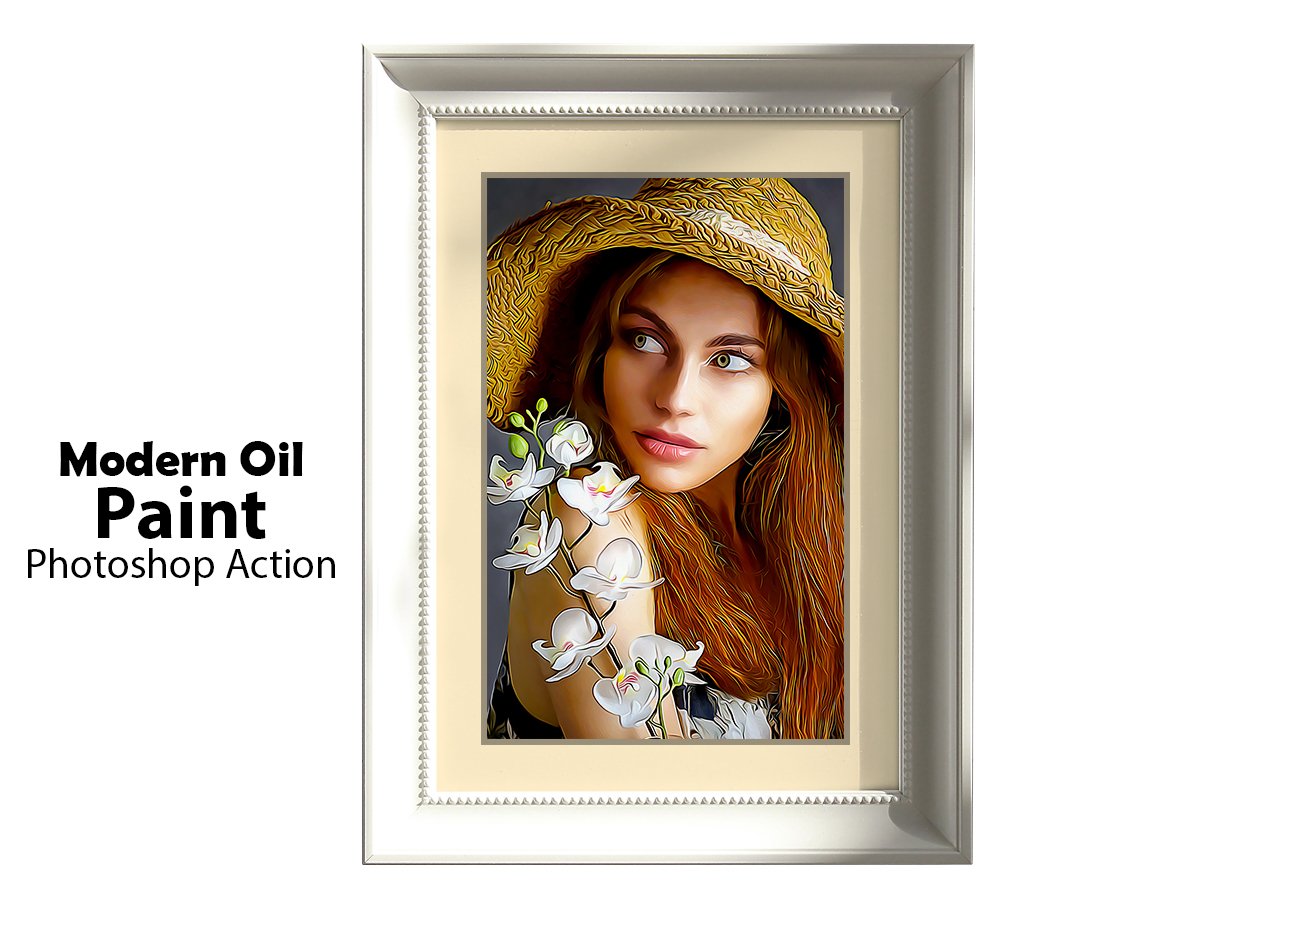 Modern Oil Paint Photoshop Actioncover image.